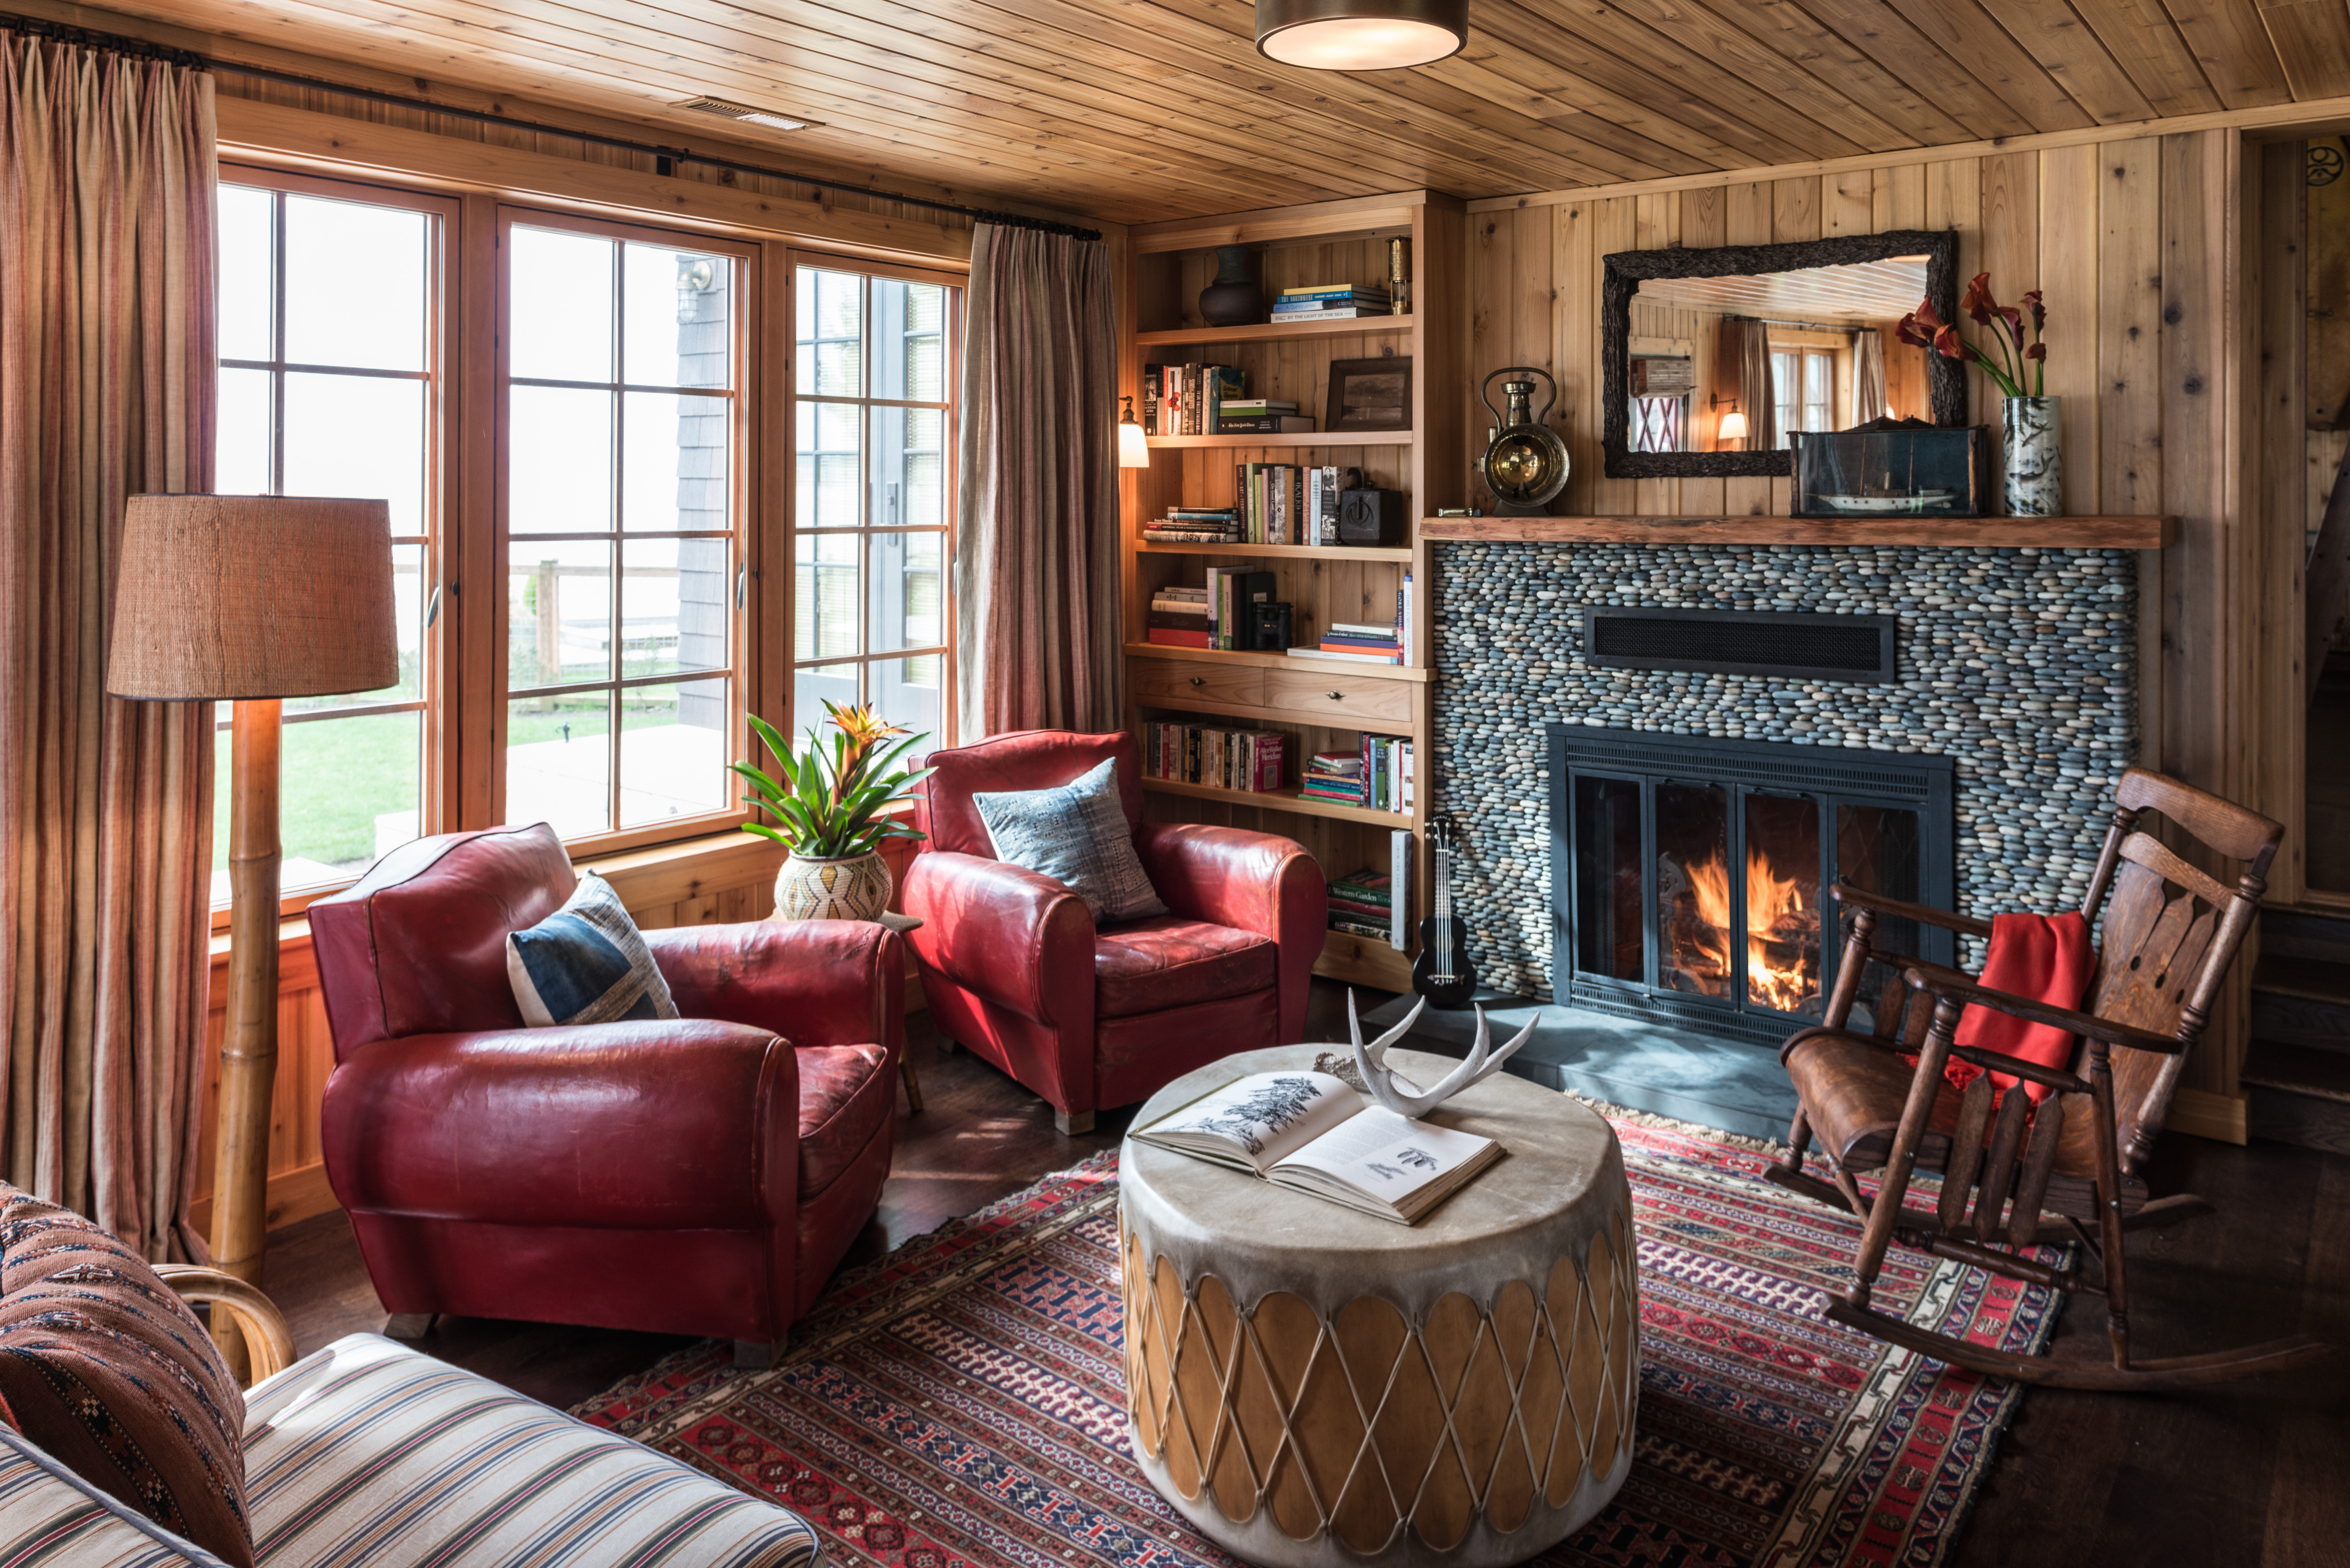 The river rock fireplace in the great room exudes a rustic charm, anchoring the space with its natural beauty and providing a cozy focal point for gatherings.